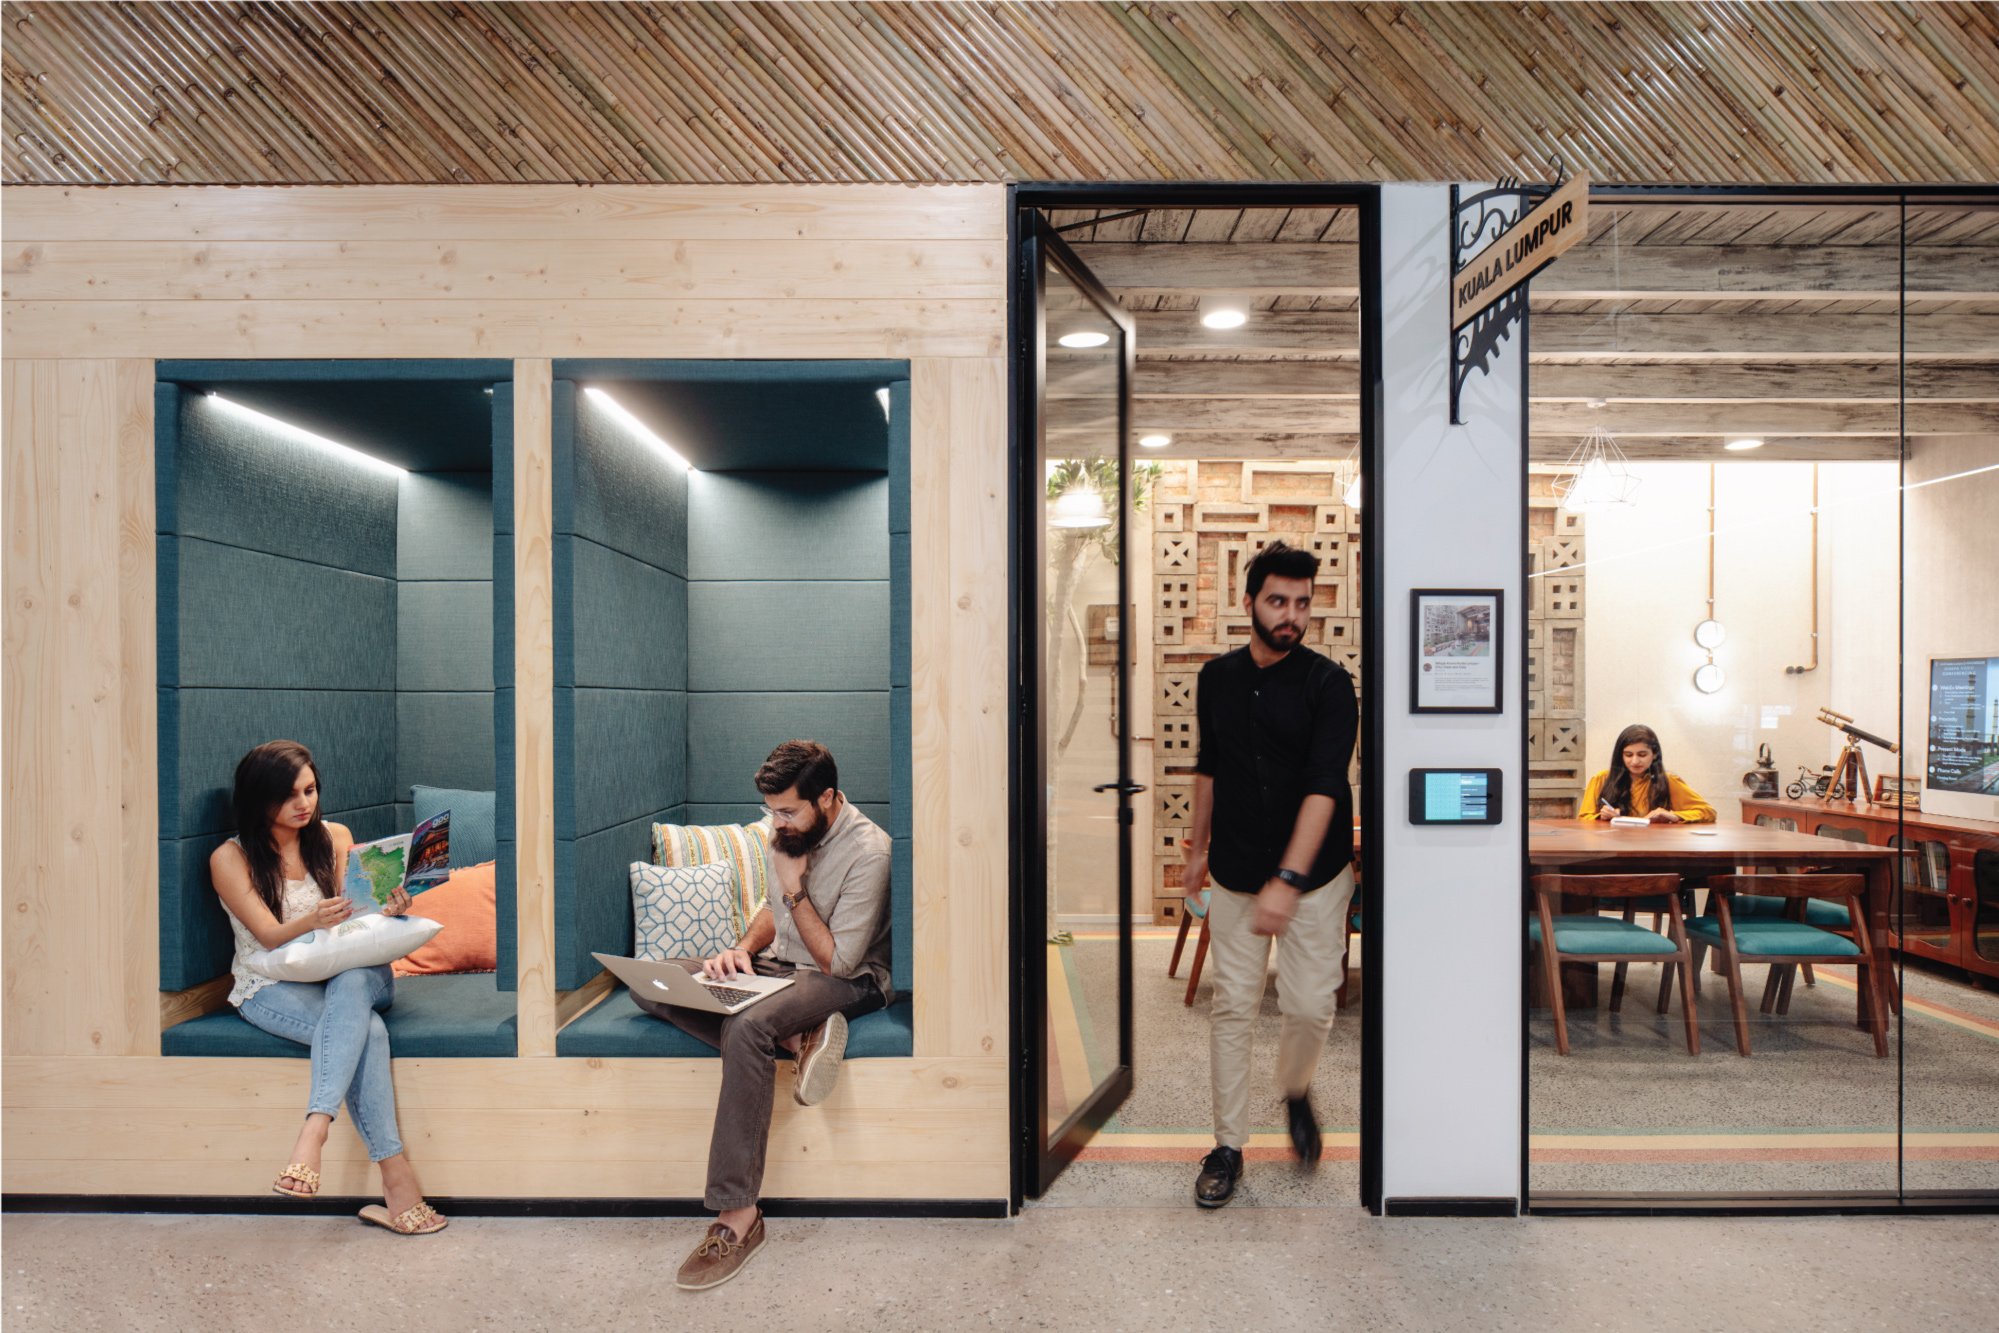 Airbnb Gurgaon office - A schedule-based or fixed-hybrid workplace model